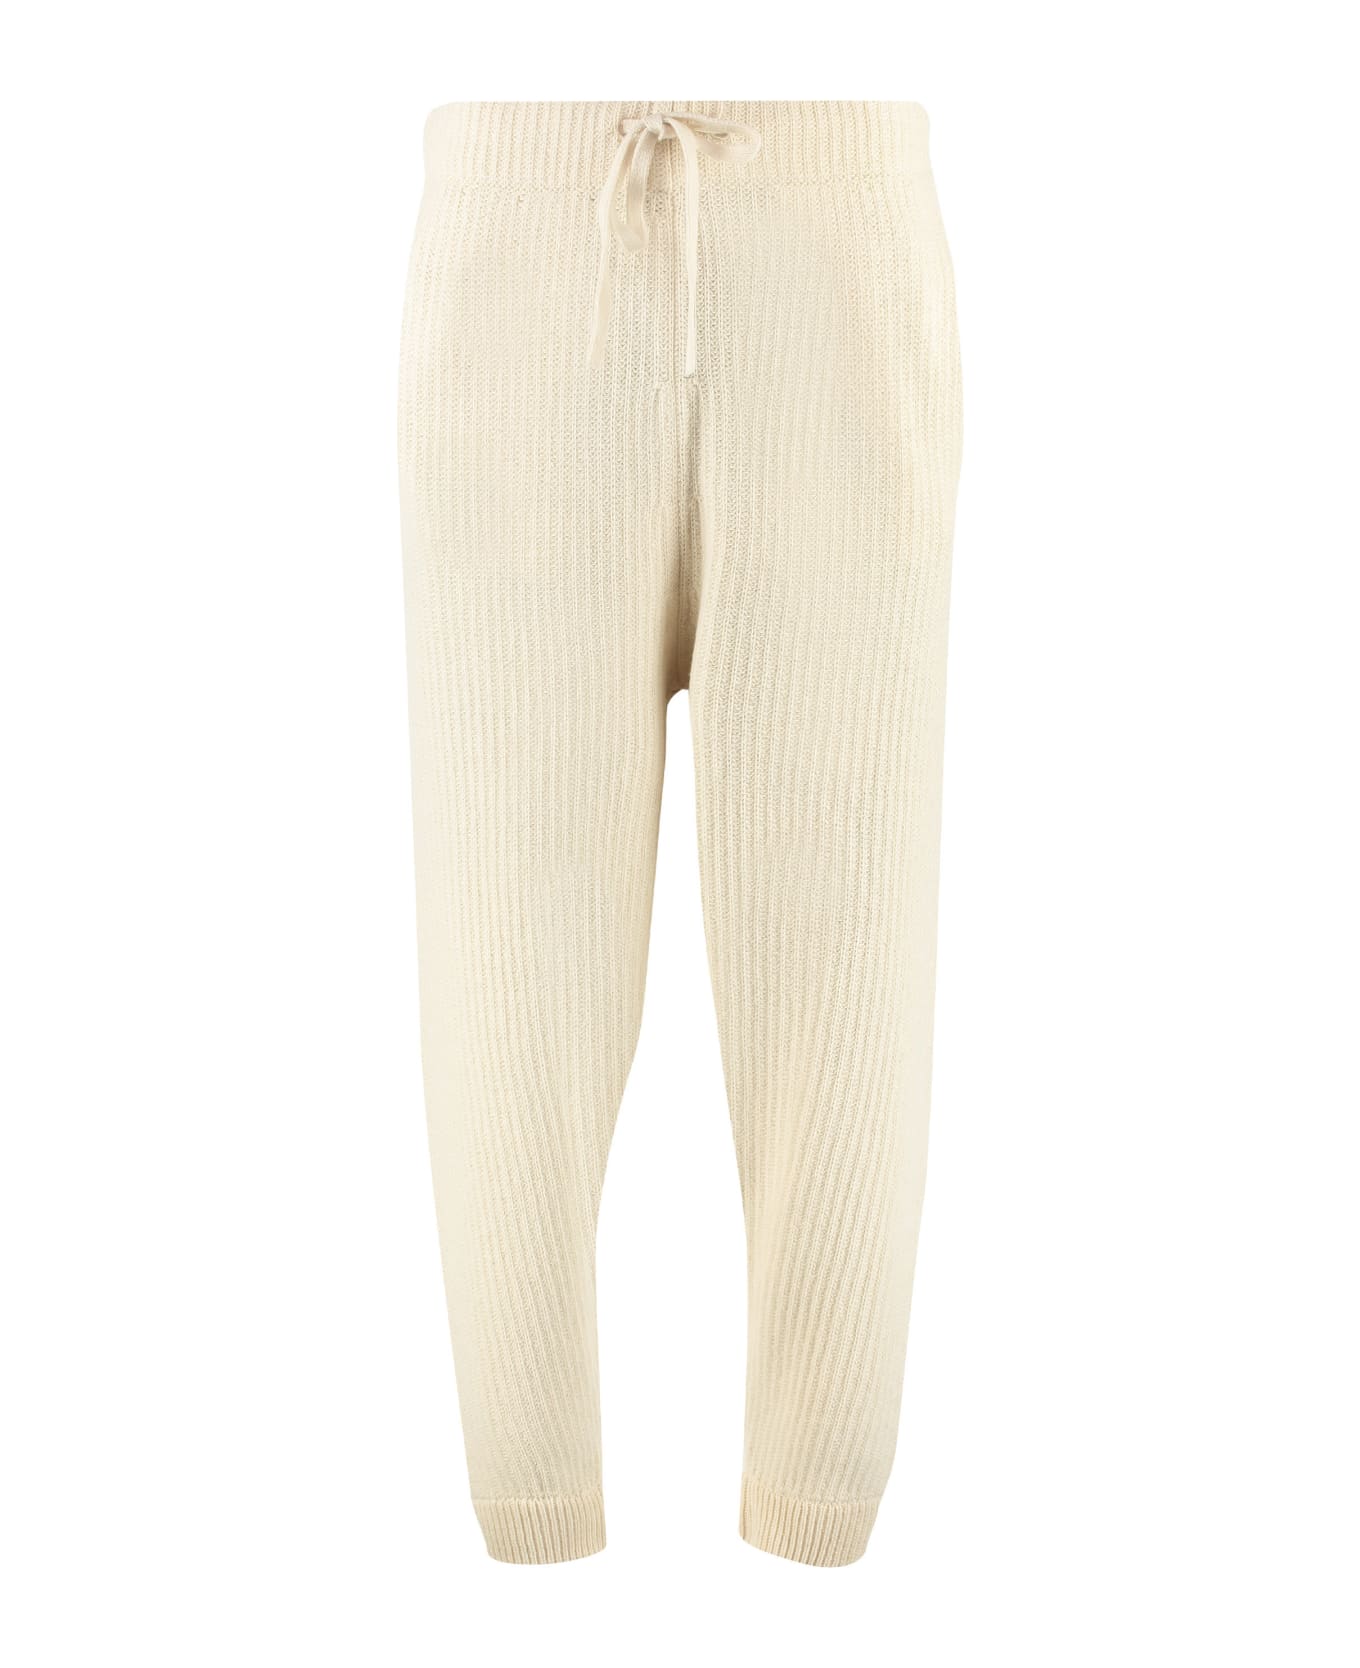 Moncler 2 Moncler 1952 - Rib Knitted Trousers - Ivory